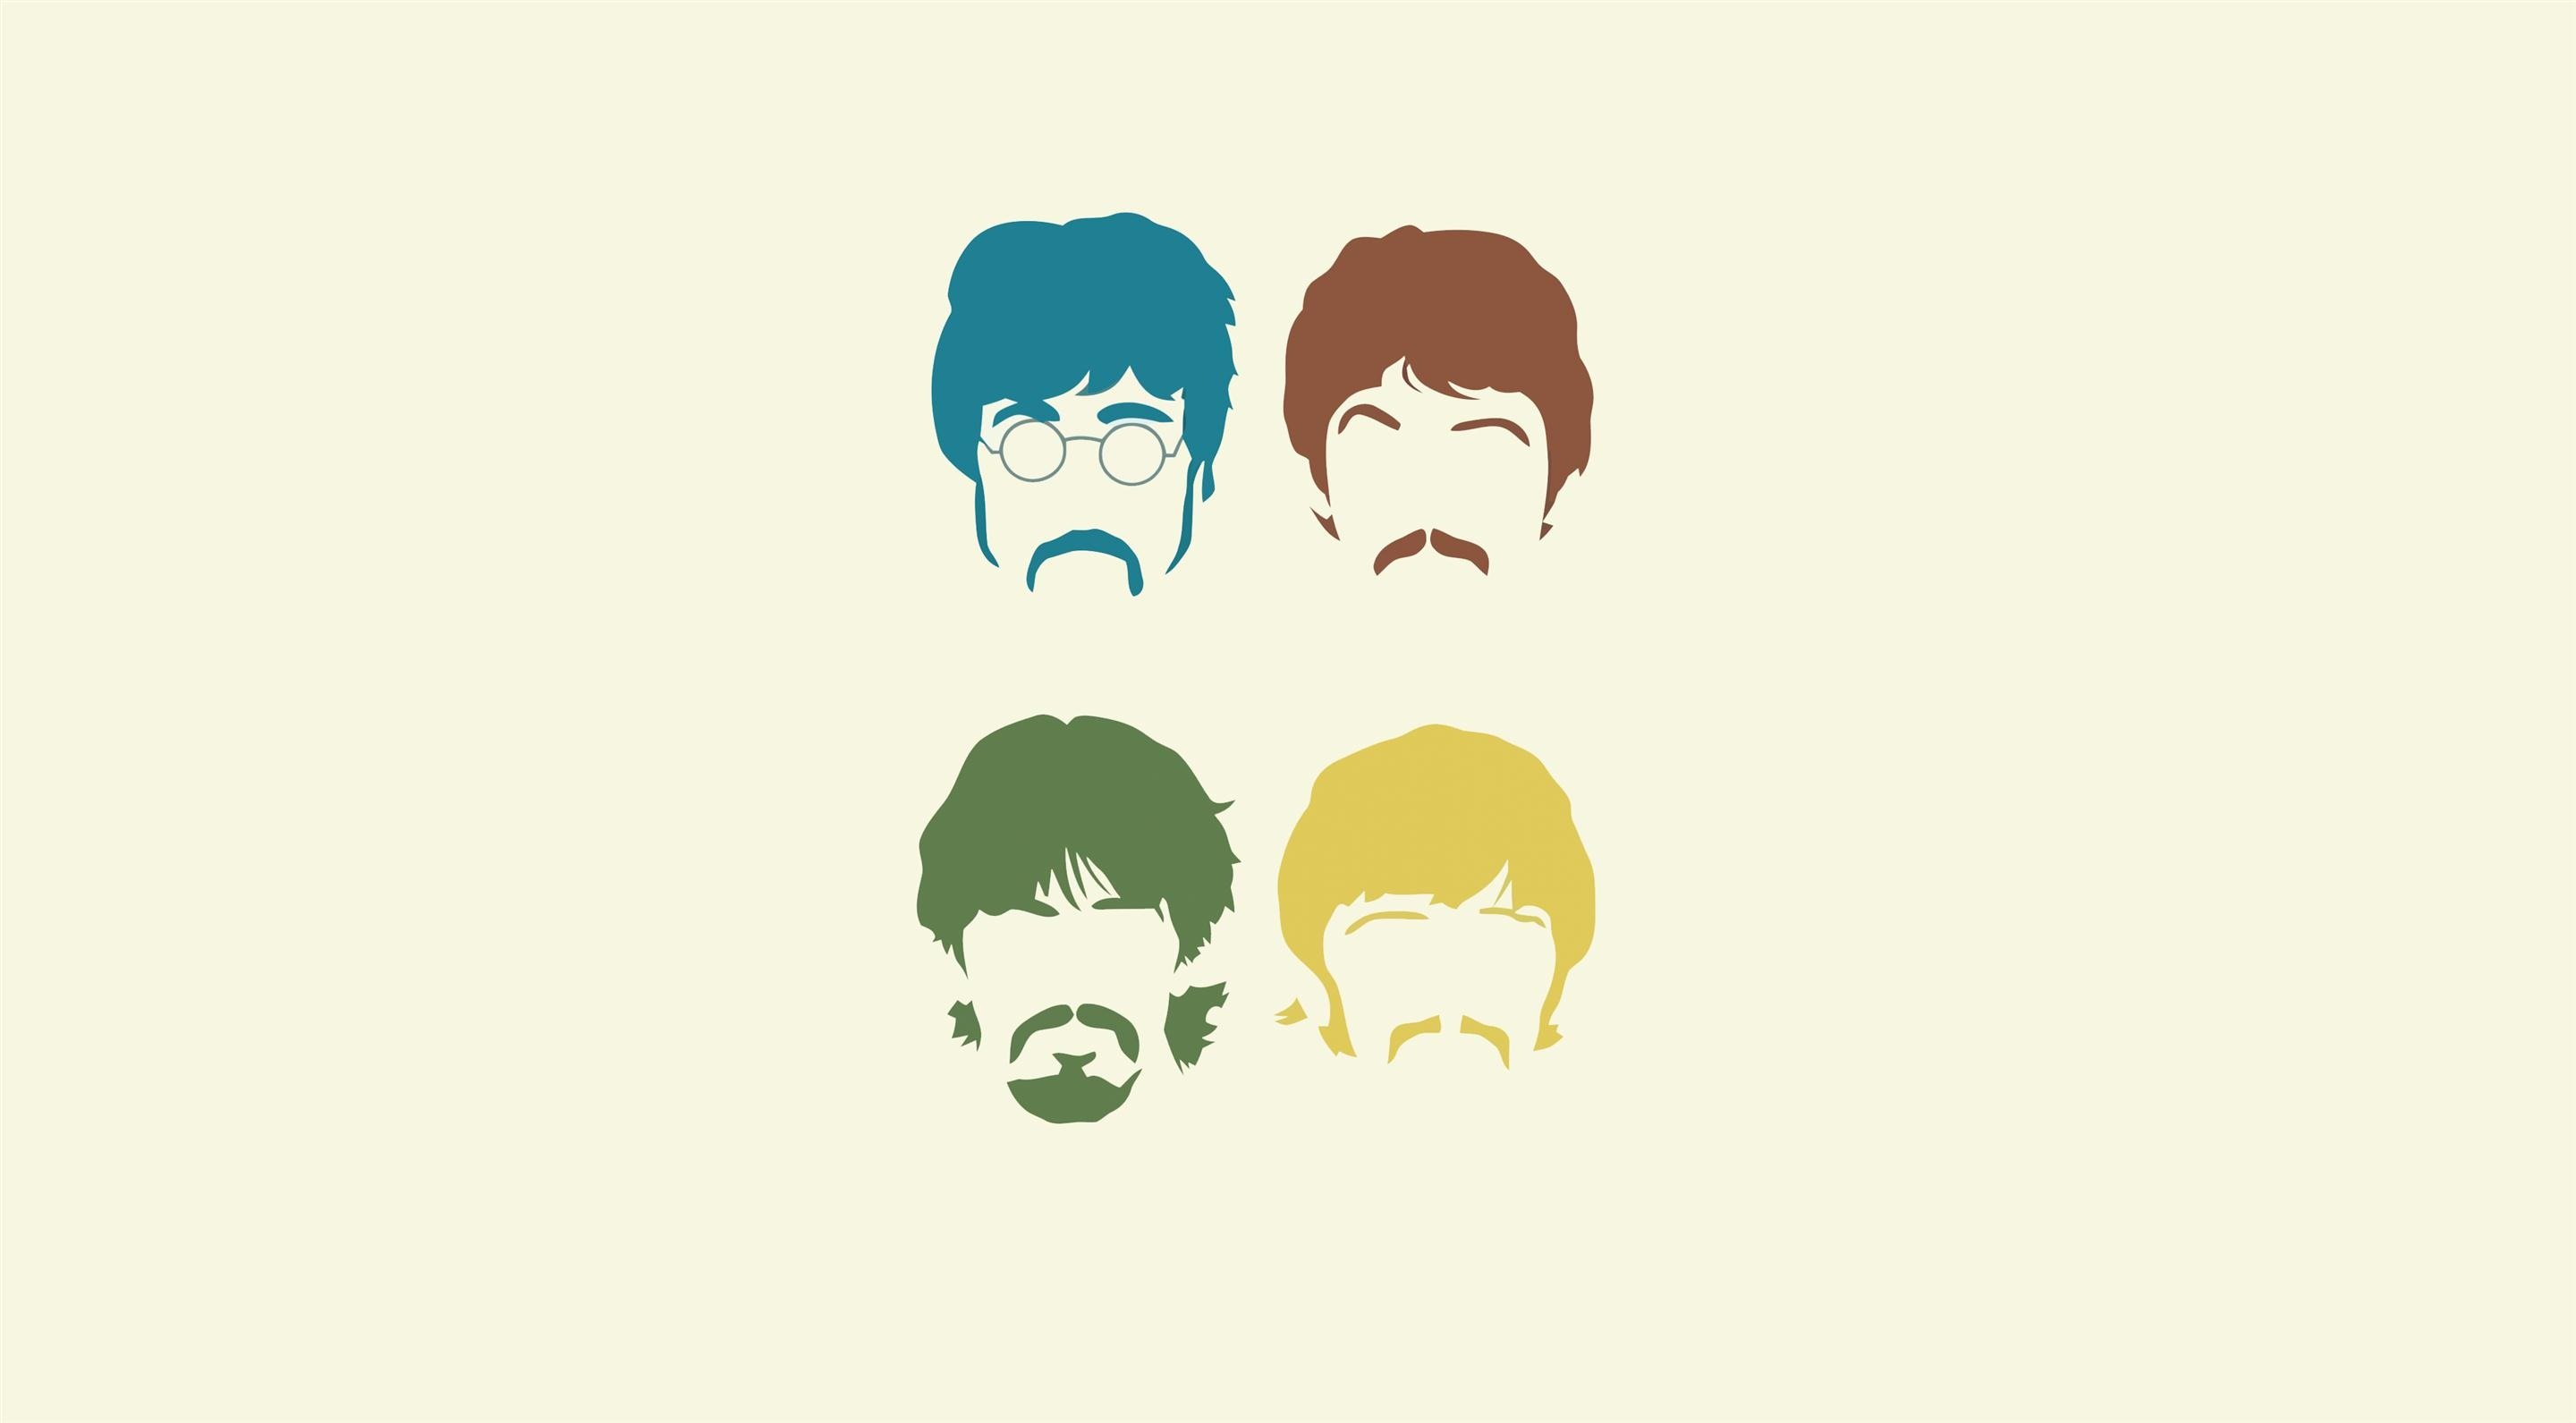 Beatles 4k Wallpapers For Your Desktop Or Mobile Screen Free And Easy To Download